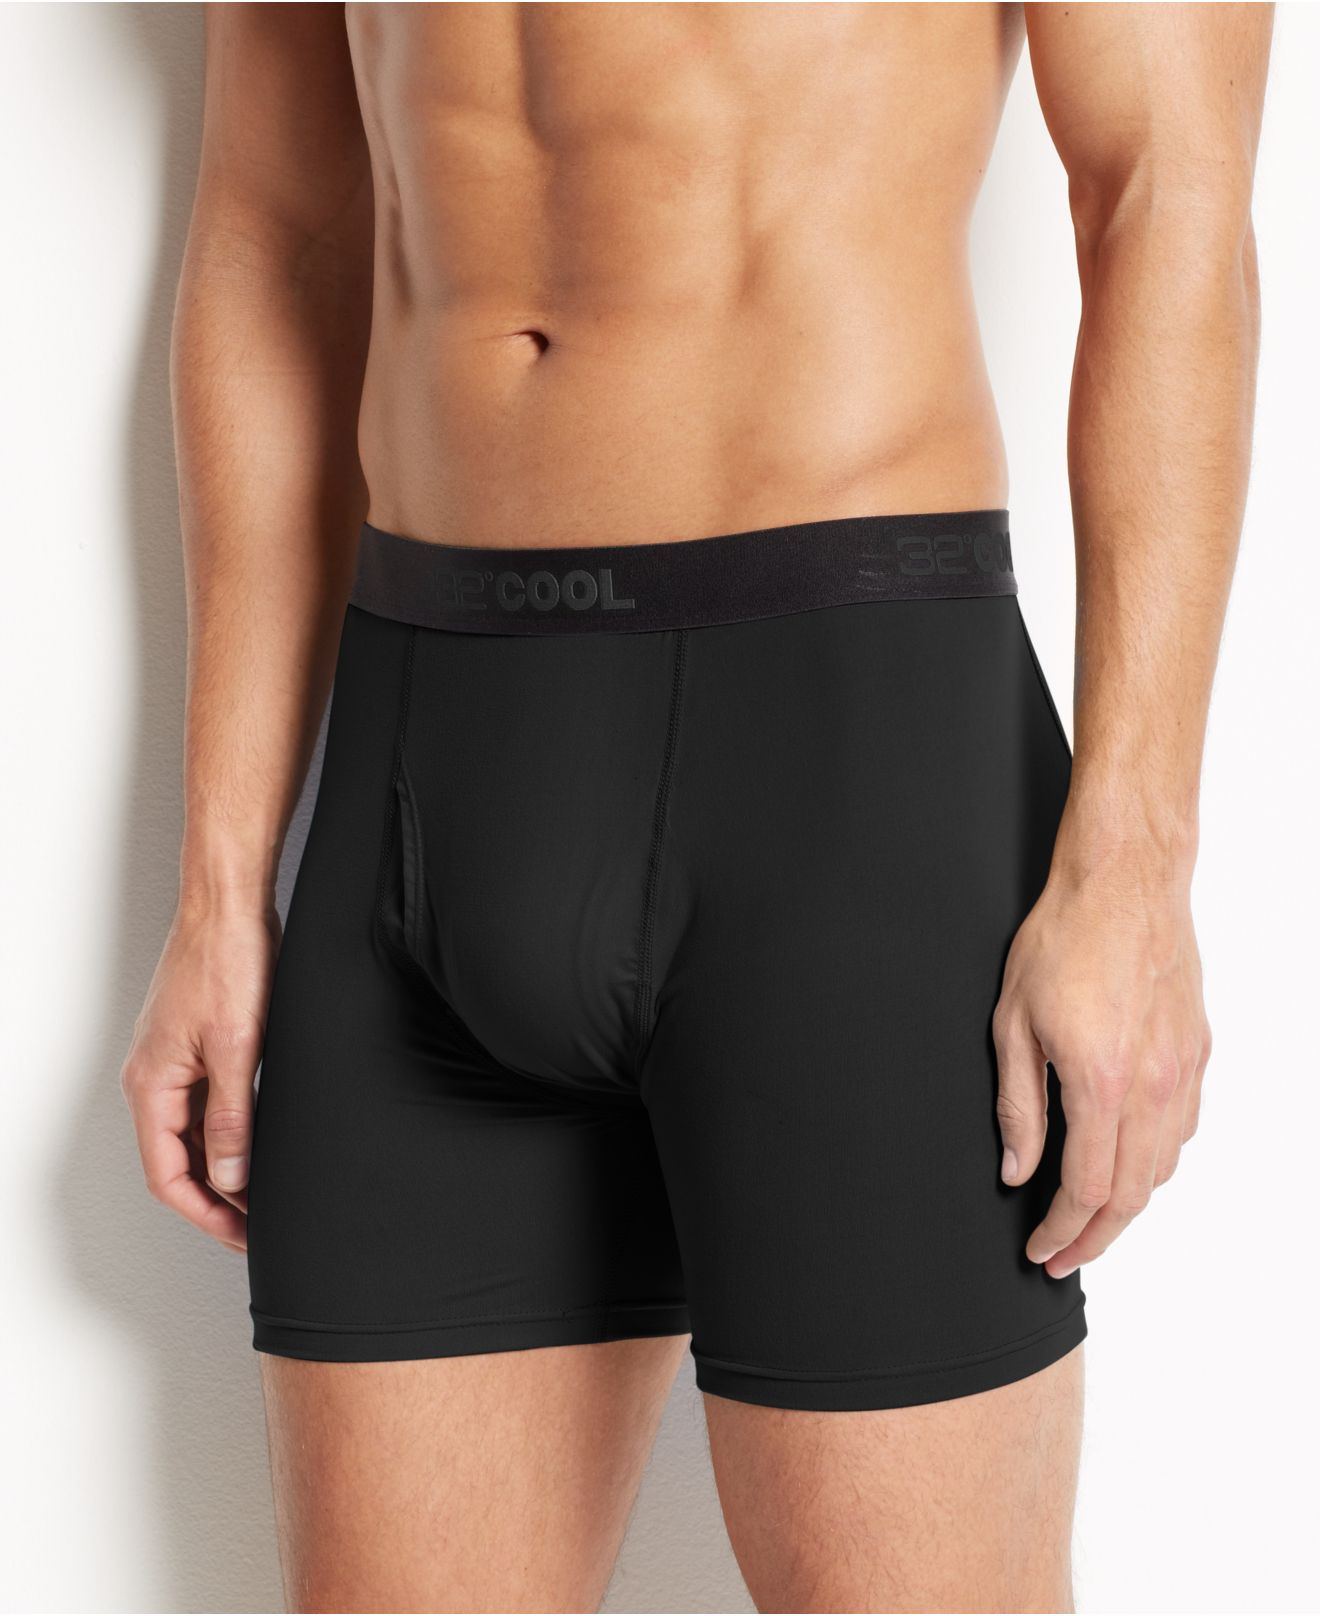 32 degrees Cool Men's Athletic Performance Boxer Briefs in Black for